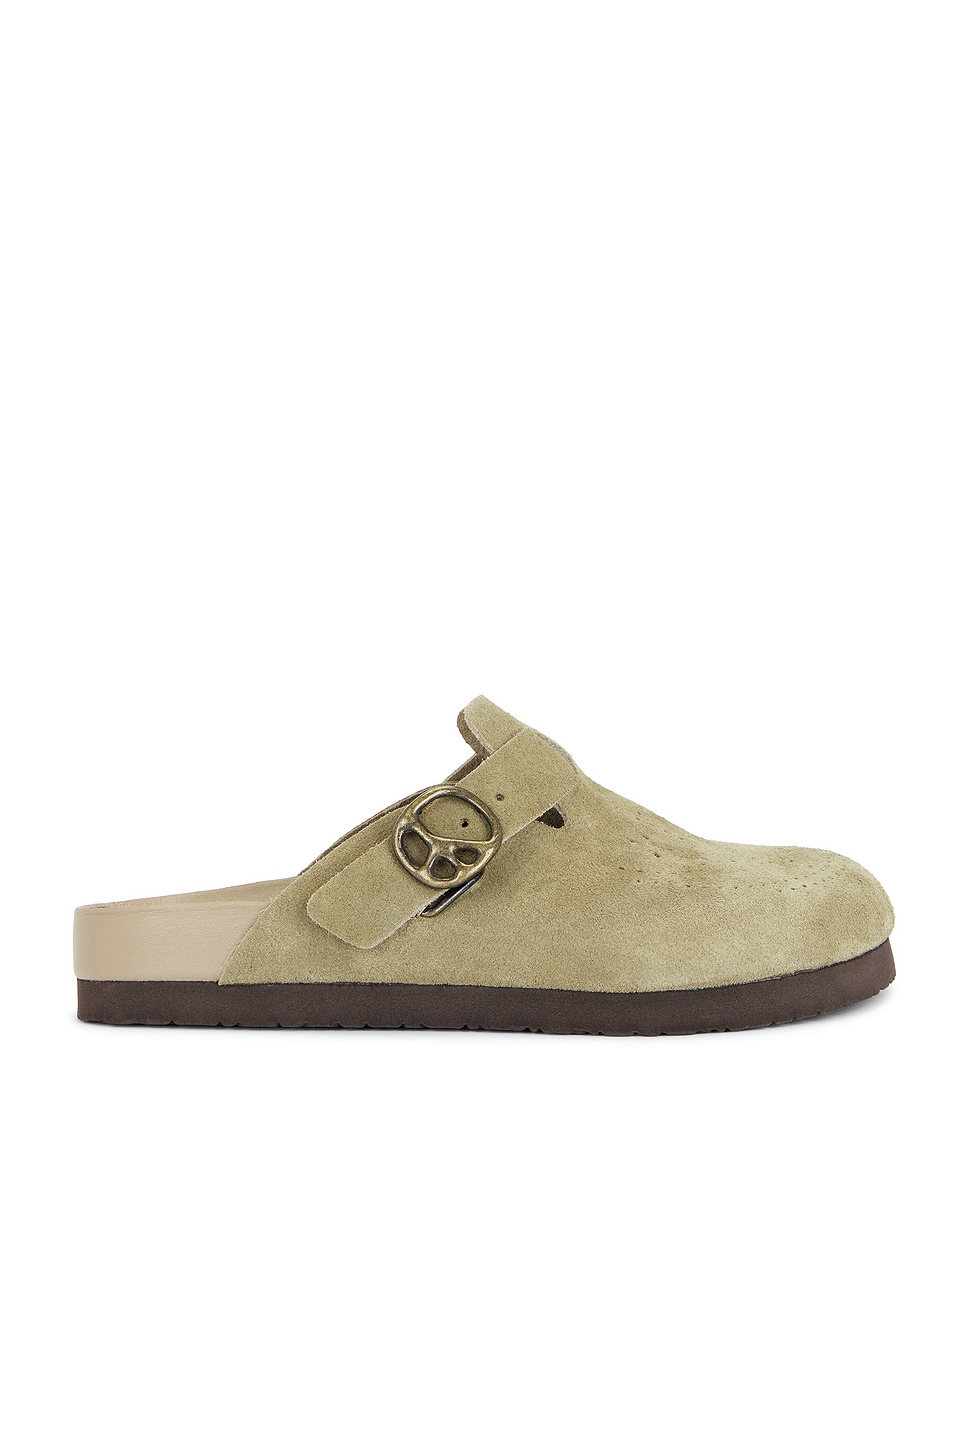 Image 1 of Needles Leather Clog Sandal in Taupe